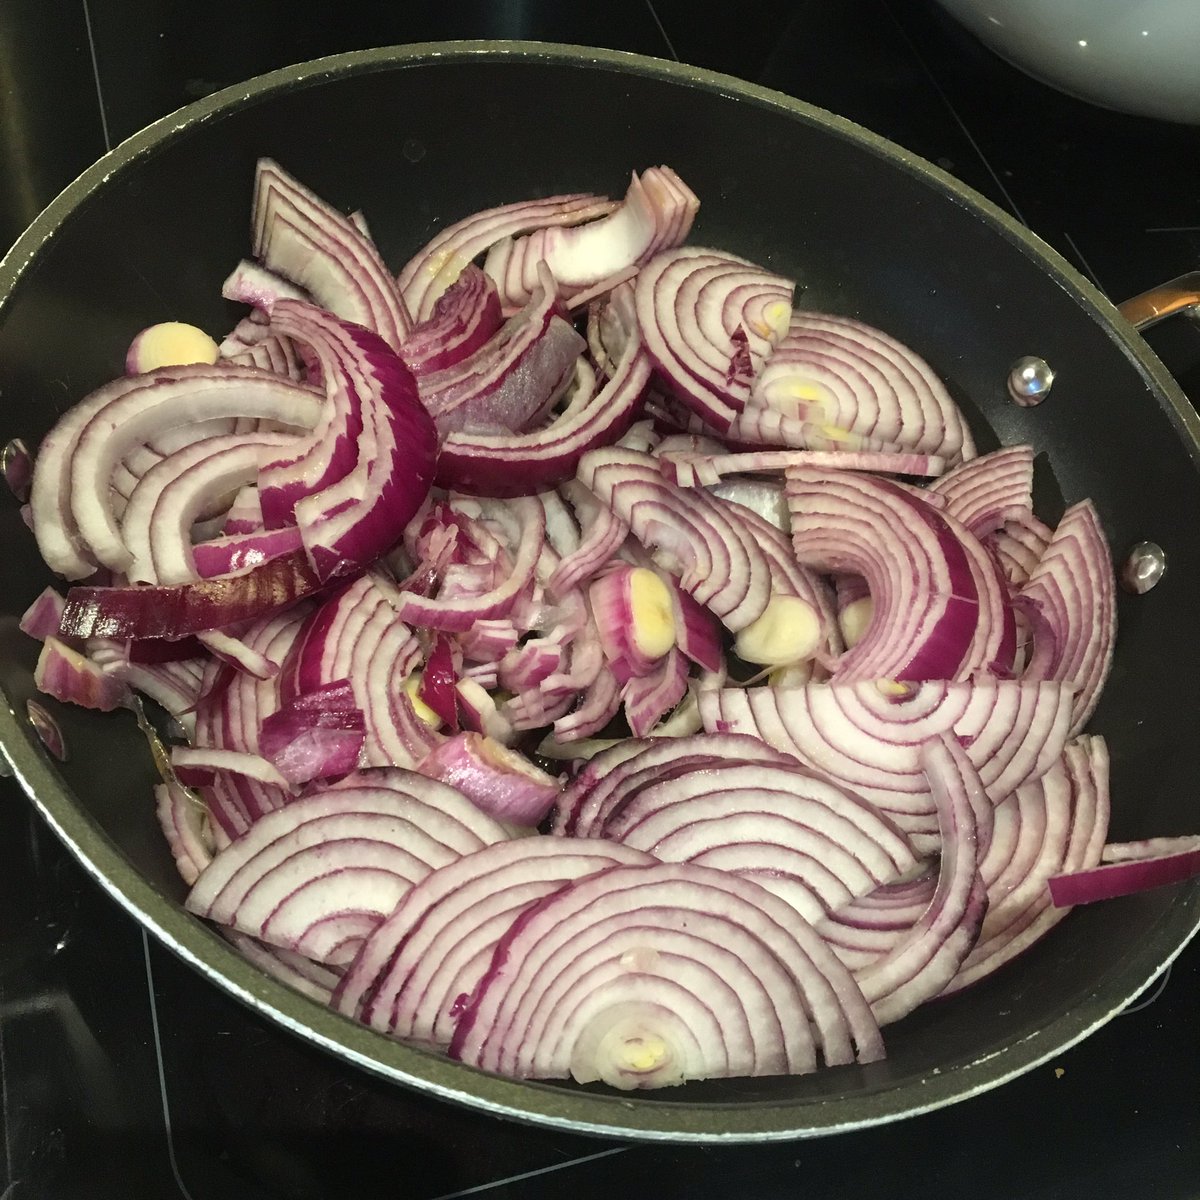 Now back to those onions - before and after. I think you’ll agree, no fucking about here.